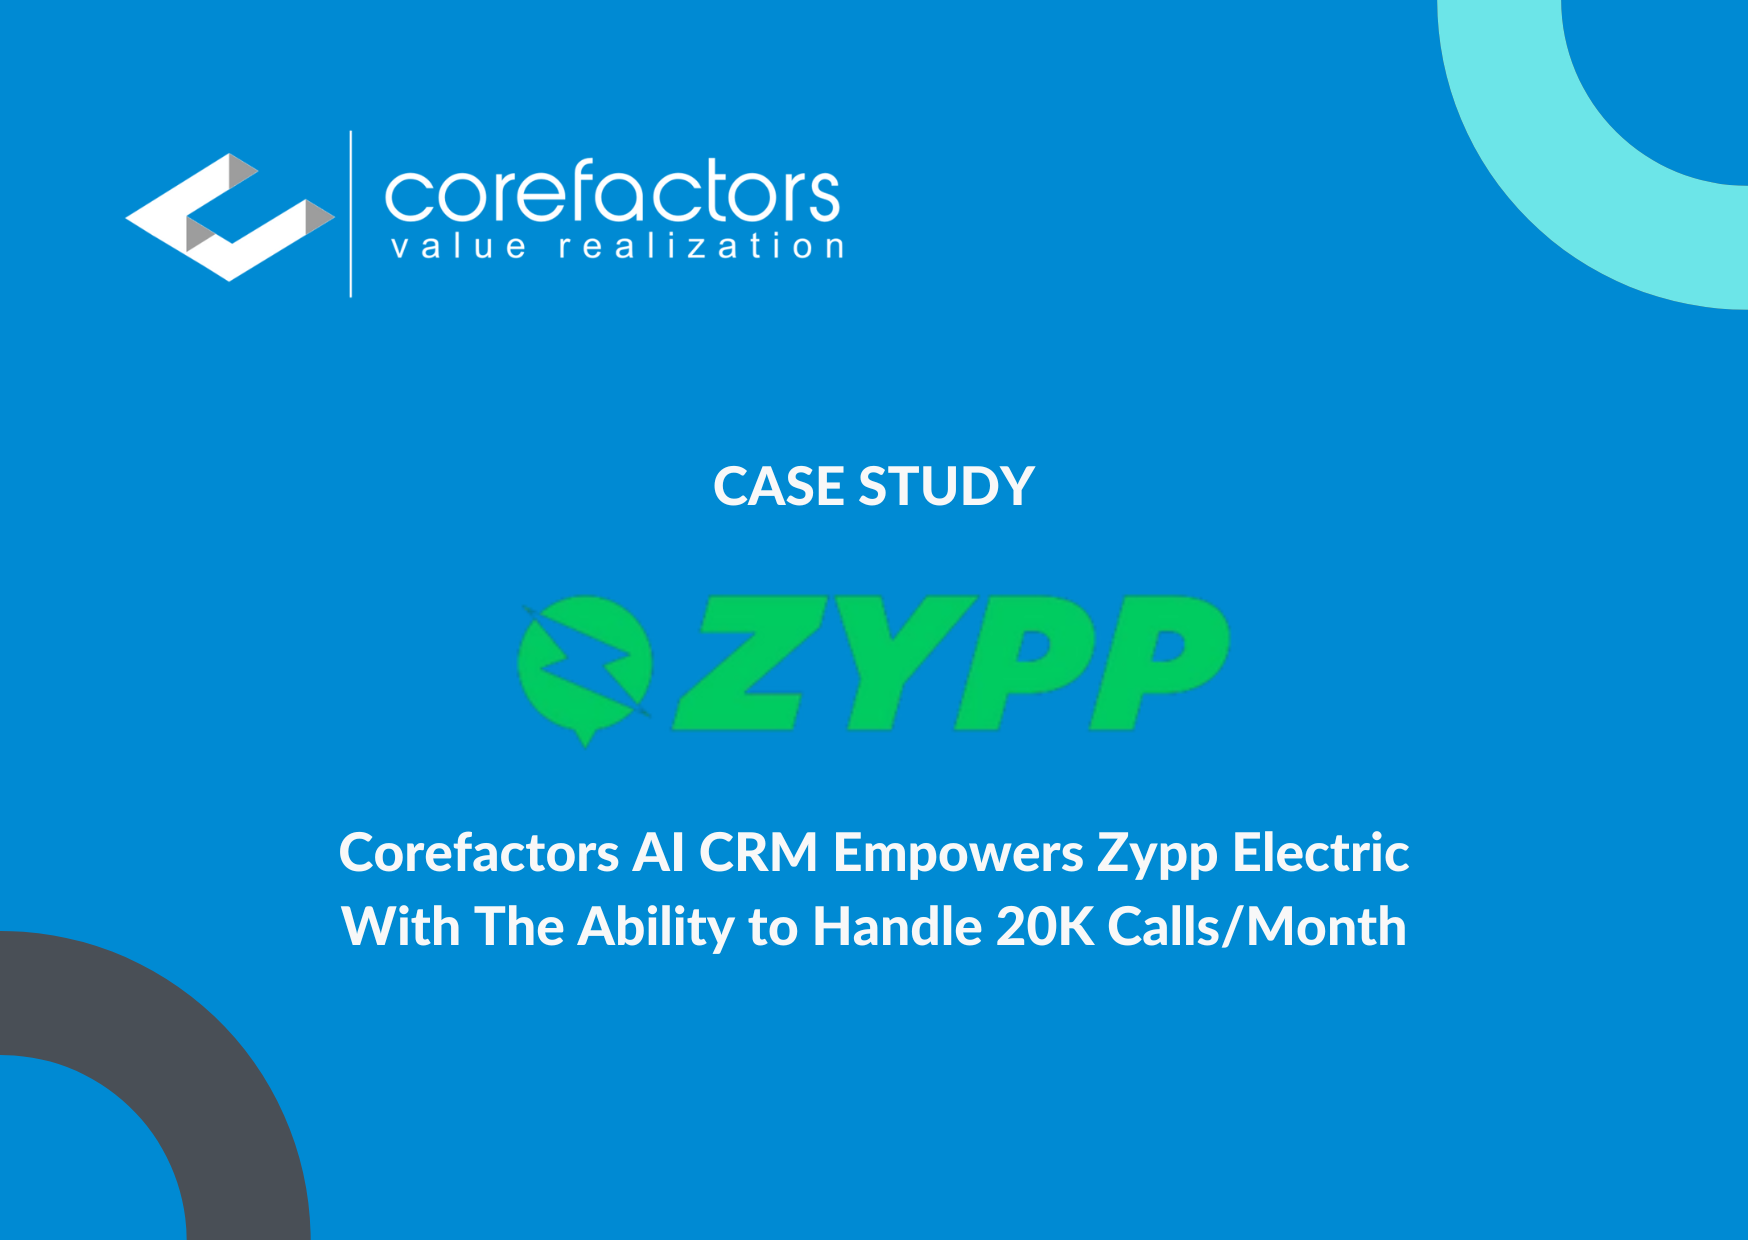 Corefactors AI CRM Empowers Zypp Electric With The Ability to Handle 20K Calls/Month